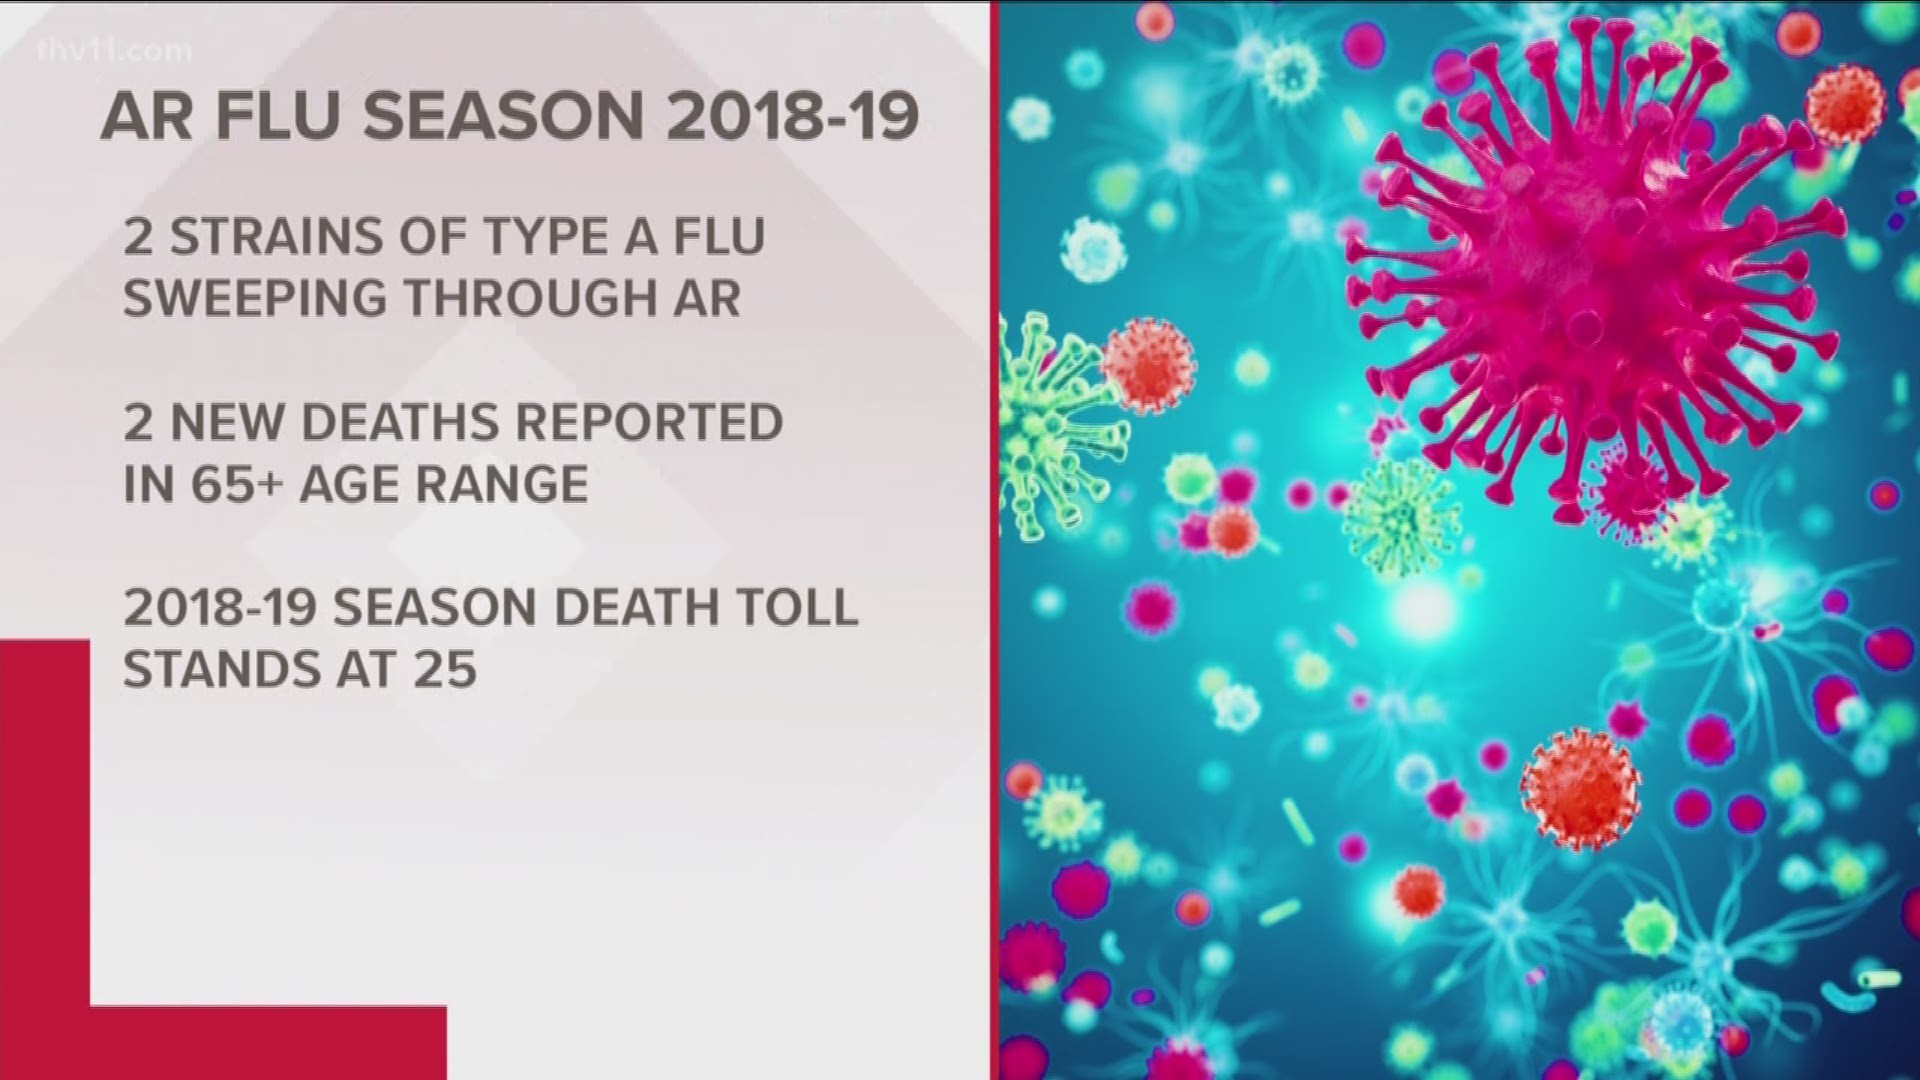 Two different strains of "type A" flu are sweeping through Arkansas homes, schools and offices.